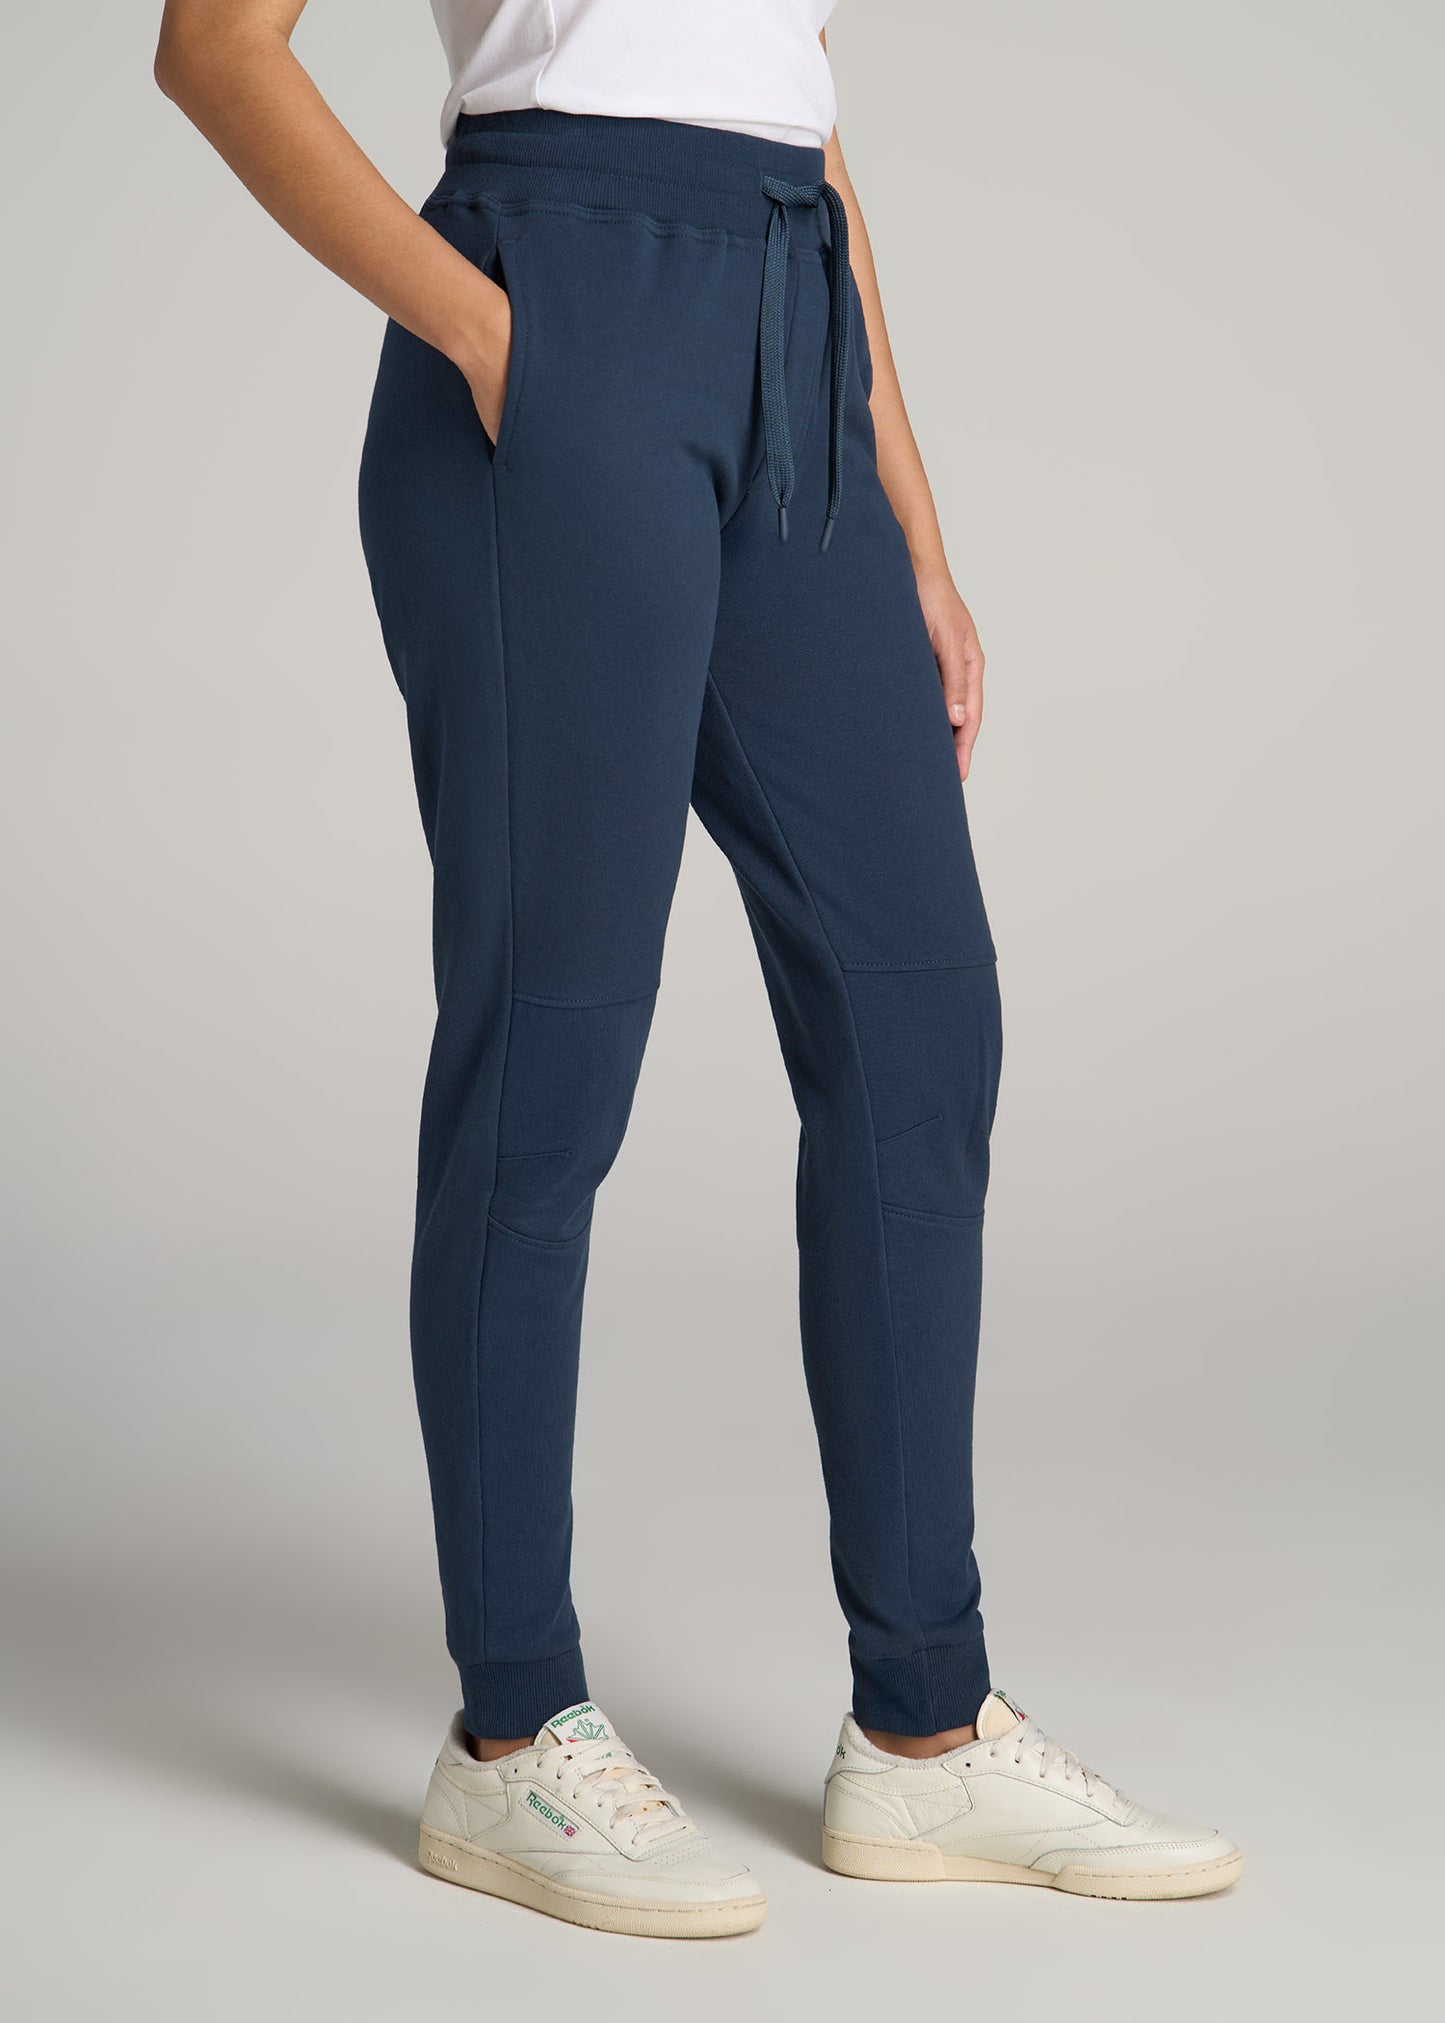 Wearever French Terry Tall Women's Joggers in Bright Navy